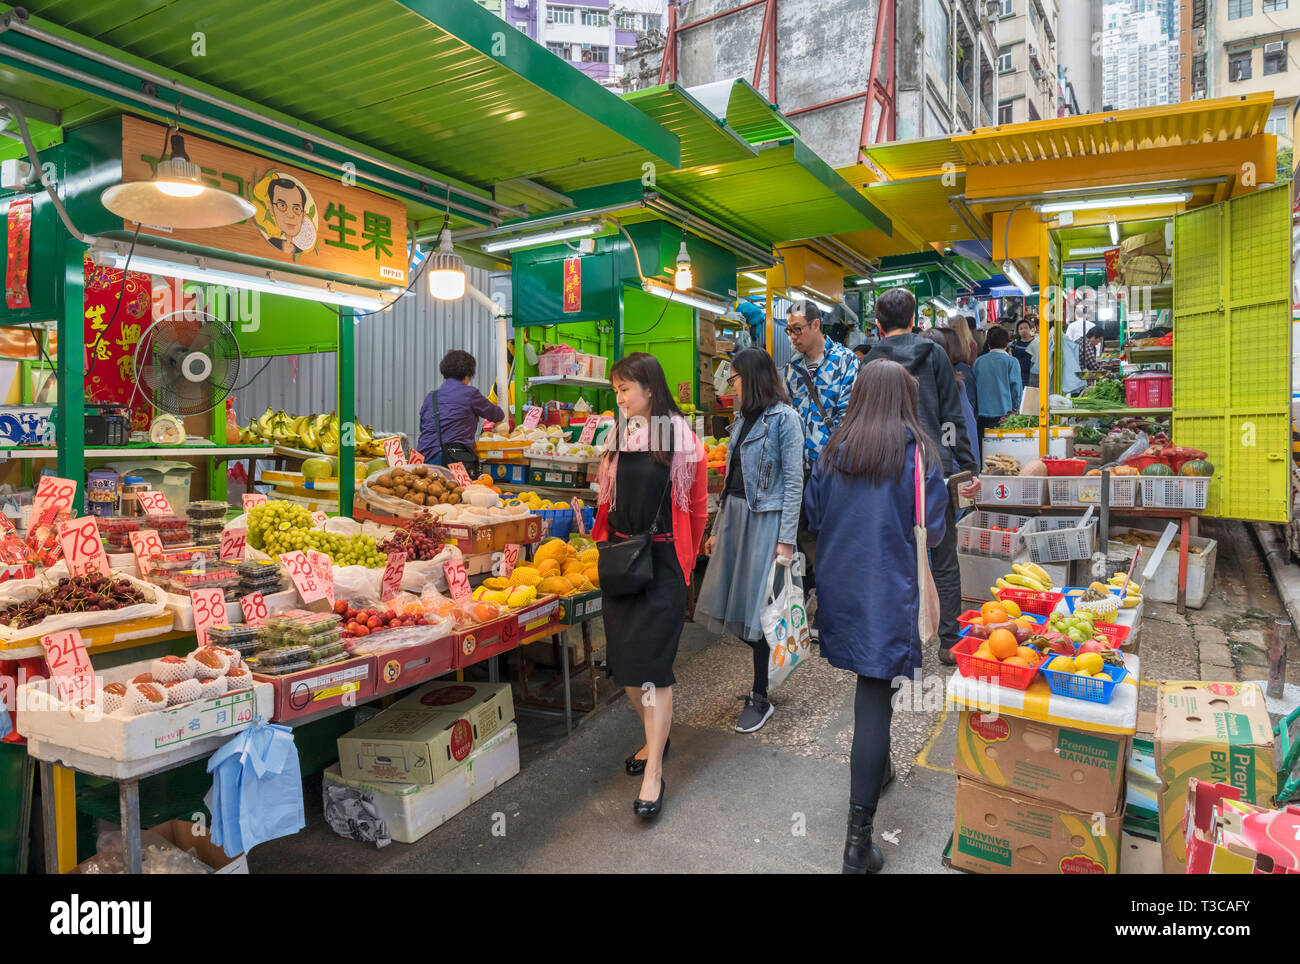 Fresh fruit and vegetable stall in the market on Graham Street, Central district, Hong Kong Island, Hong Kong, China Stock Photo